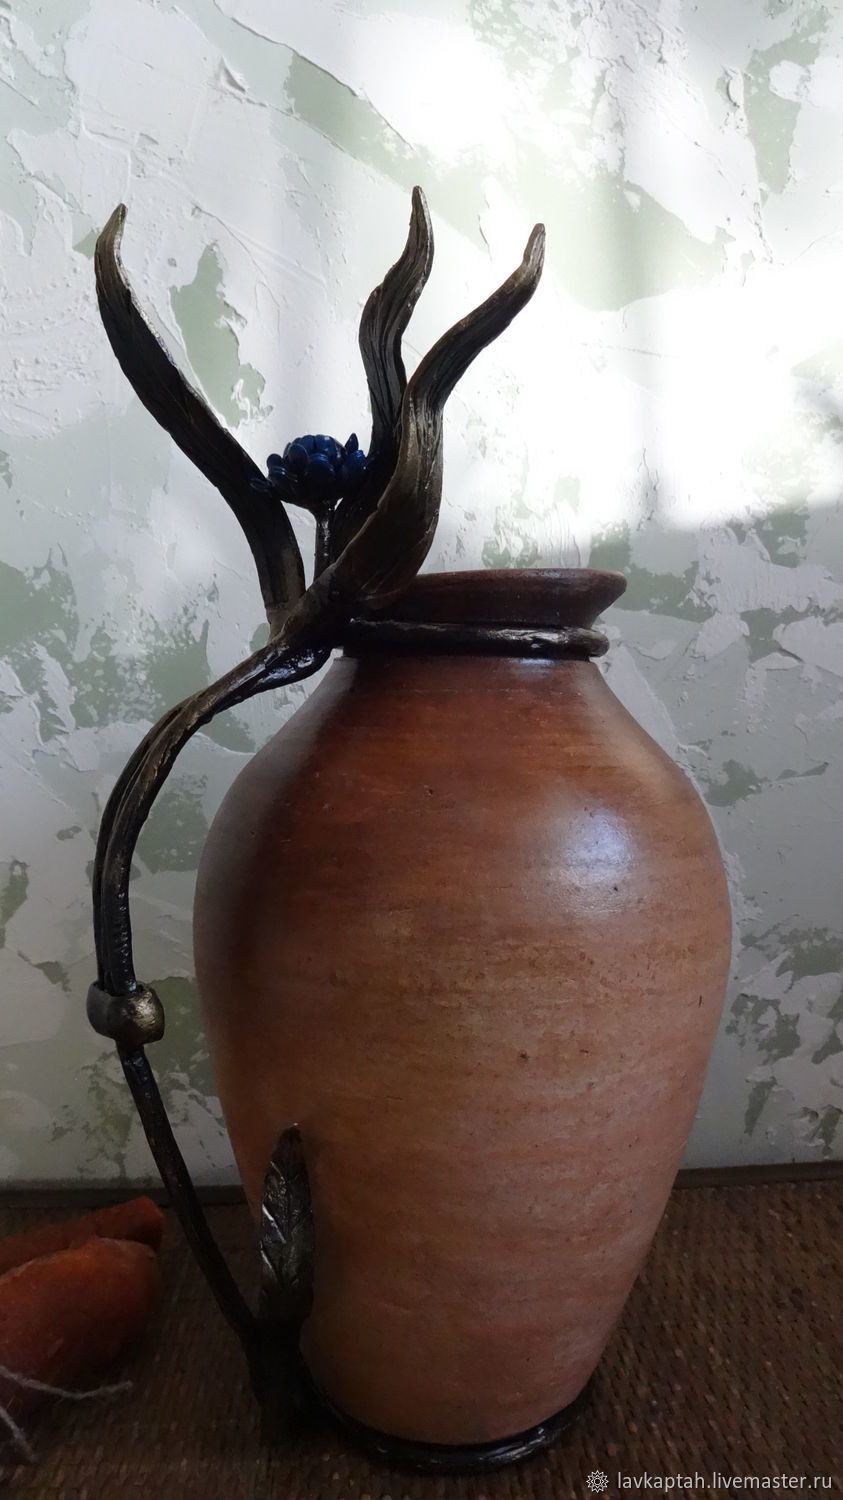 29 Recommended Pottery Vases Handmade 2024 free download pottery vases handmade of dc29anc283dc2b2nc288dc2b8dc2bd dc2a6dc2b2dc2b5nc282d dc2benc281dc2b5dc2bddc2b8 shop online on livemaster with shipping pertaining to my ac2b7